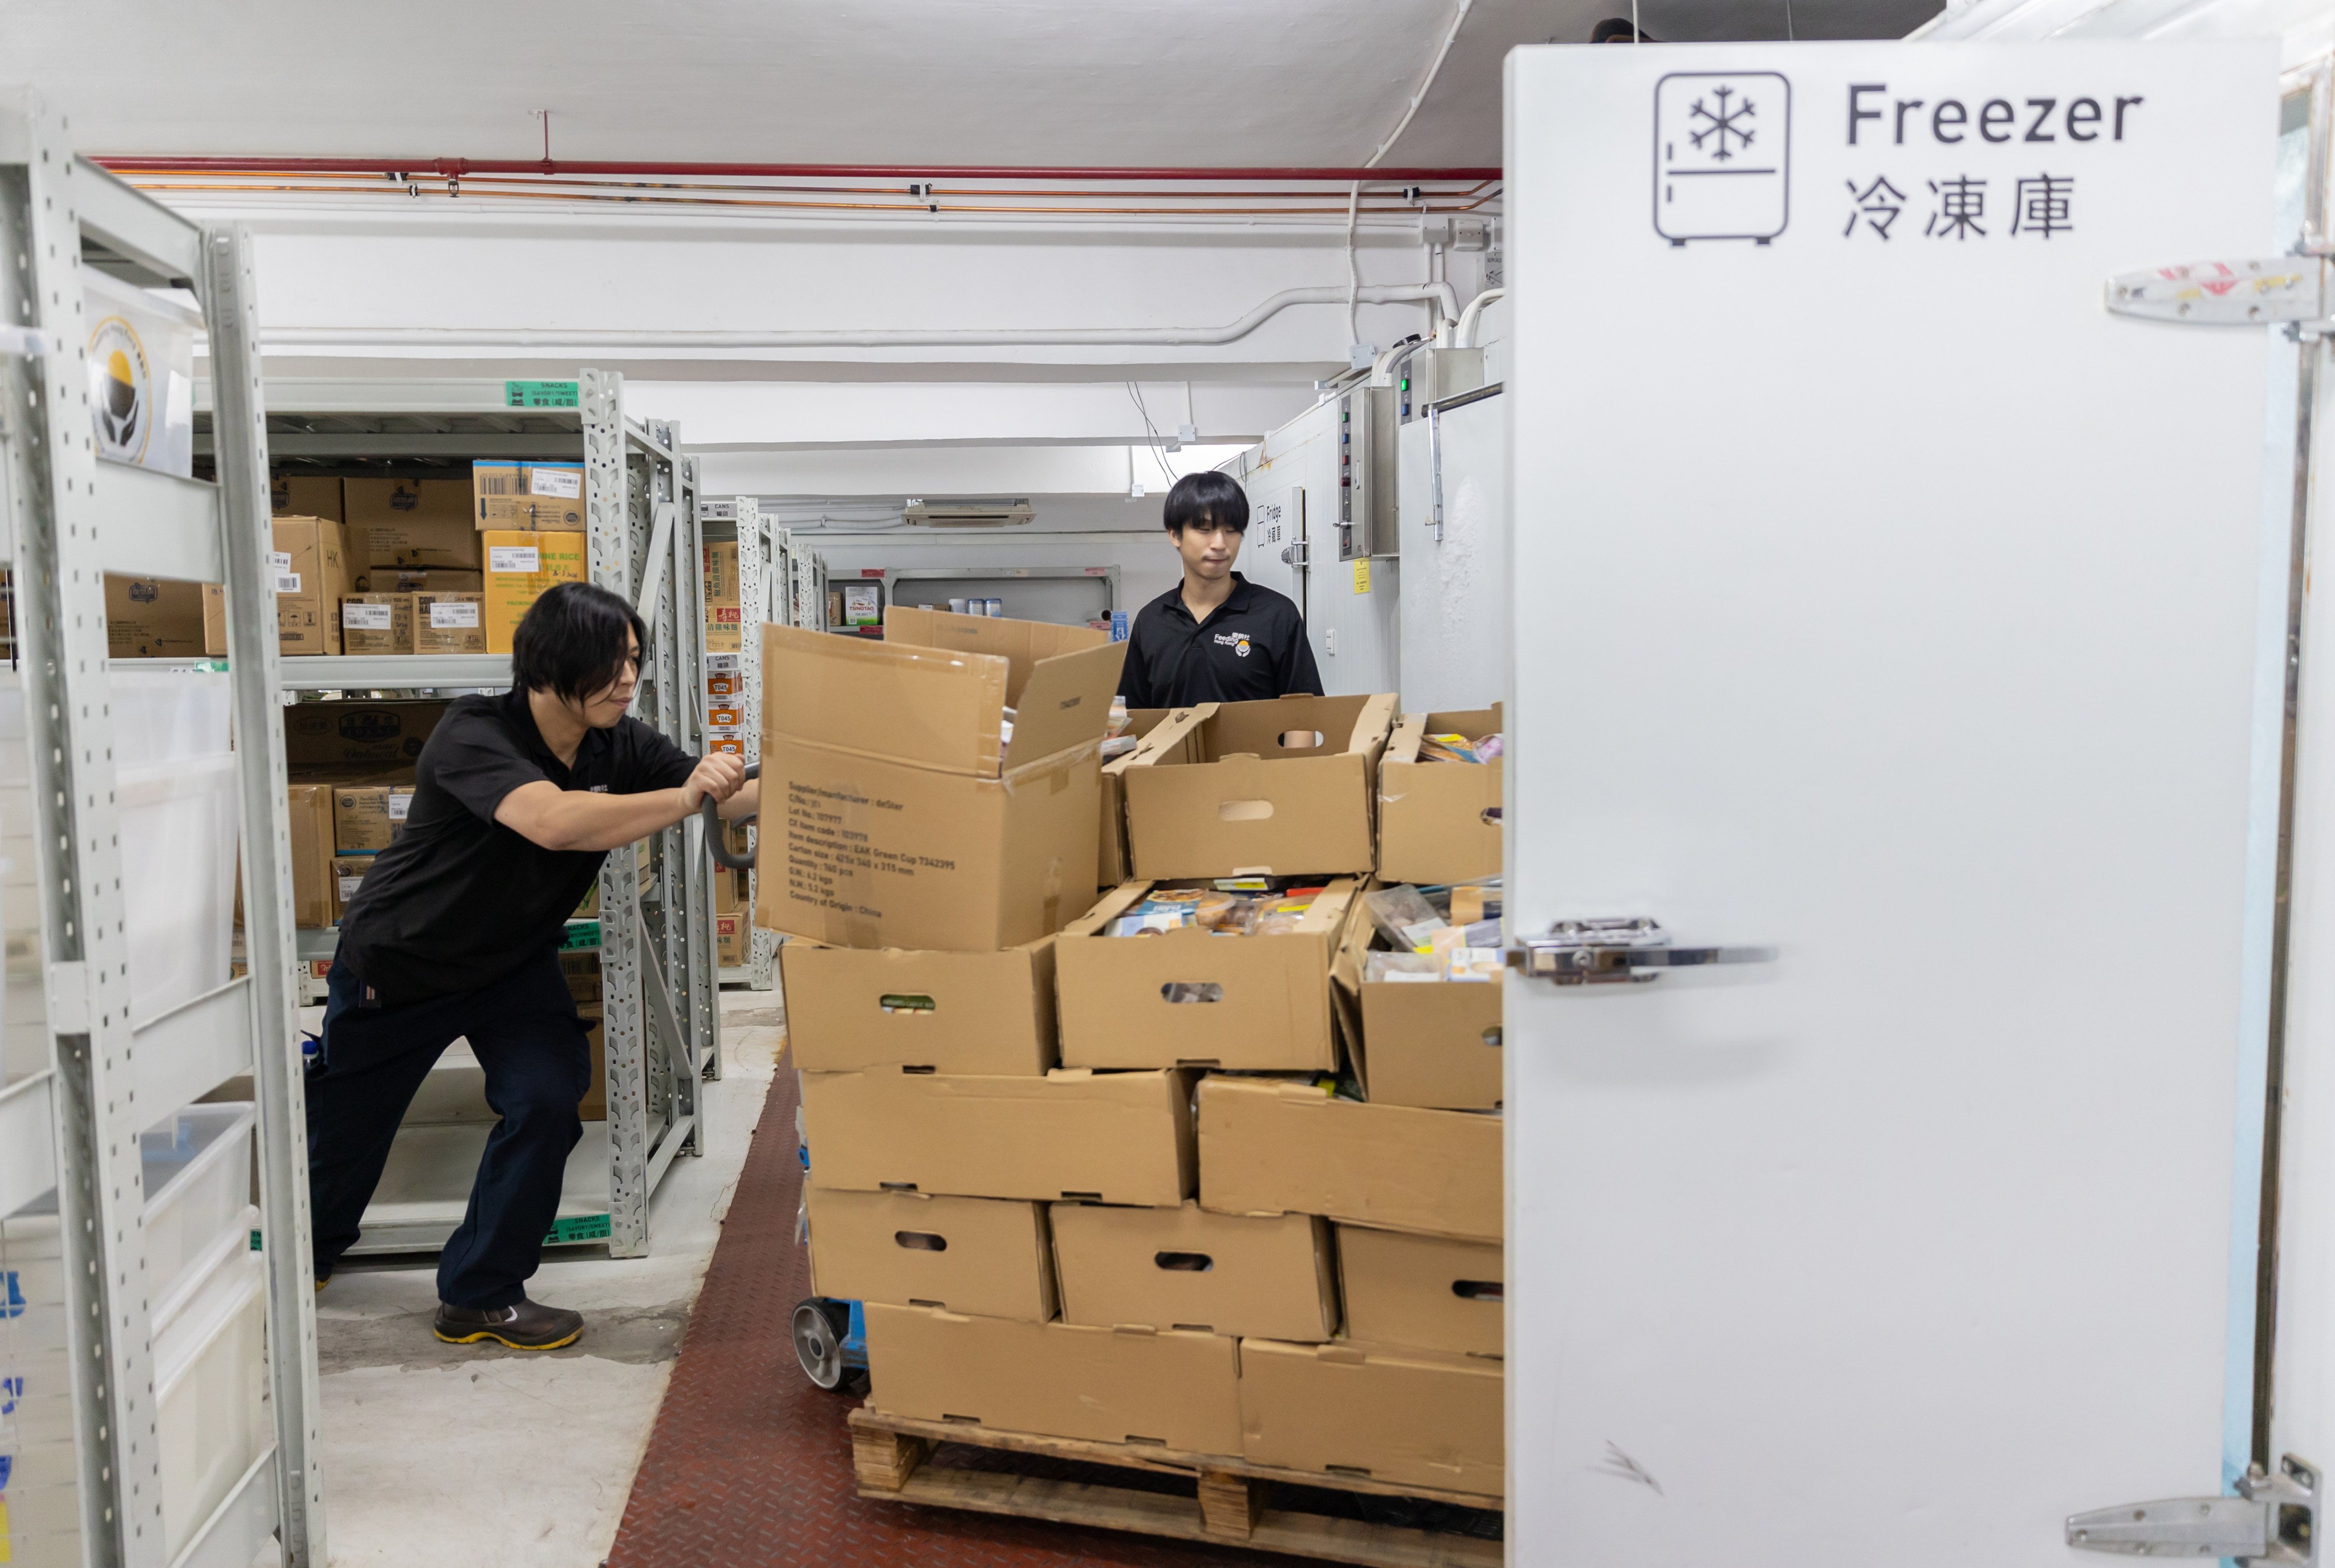 Feeding Hong Kong’s warehouse freezers are loaded up with food supplies. Photo: Handout